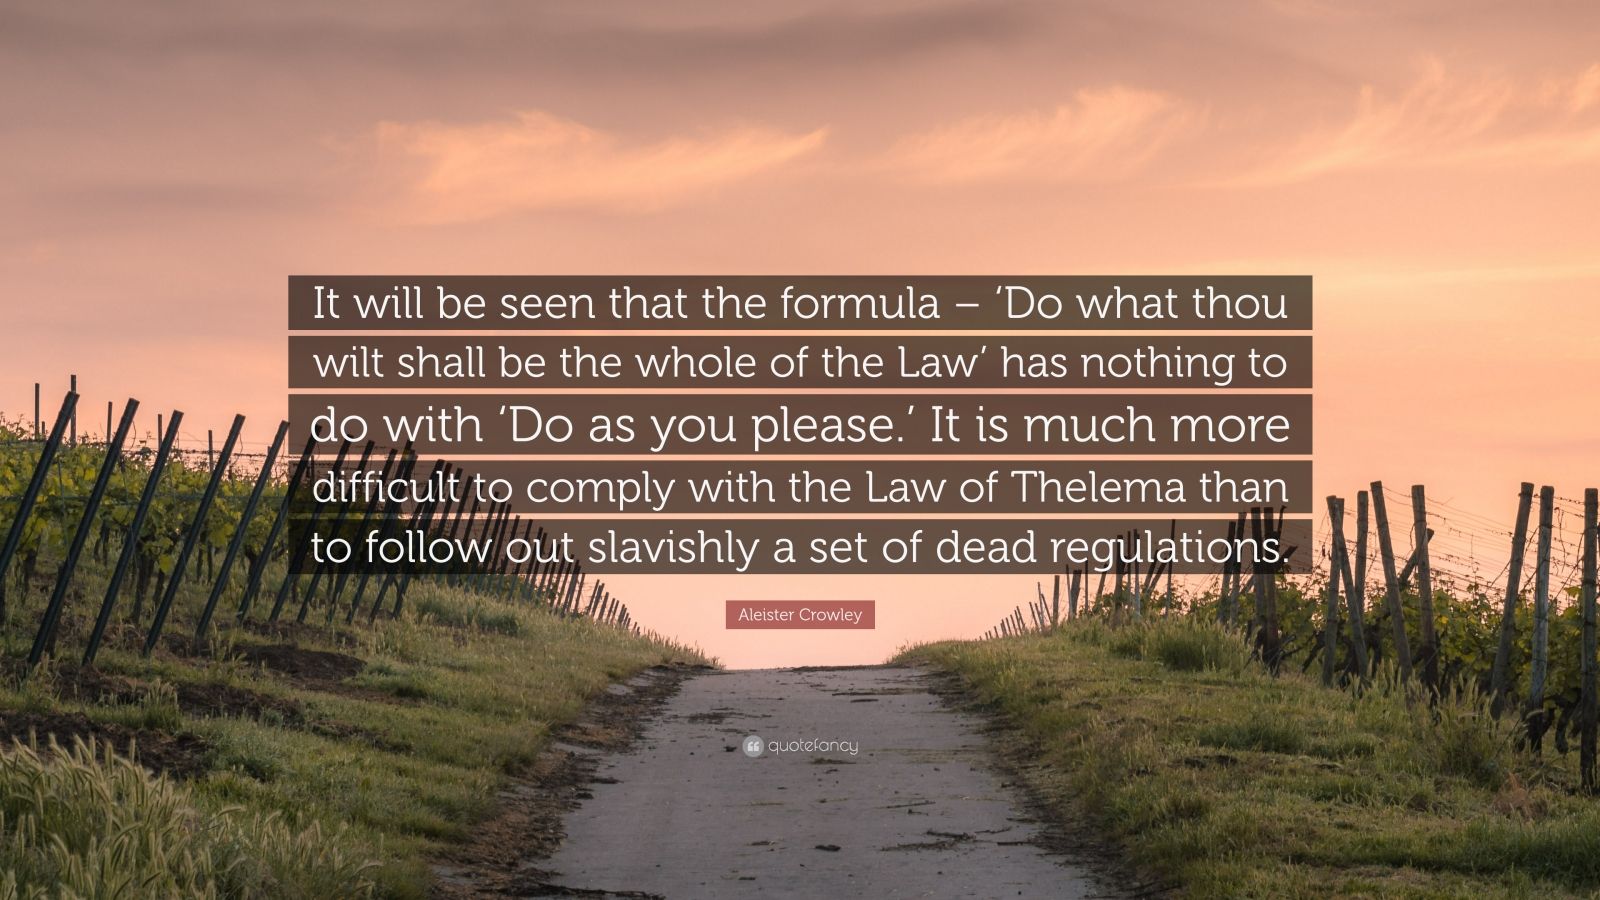 Aleister Crowley Quote: “It will be seen that the formula – ‘Do what